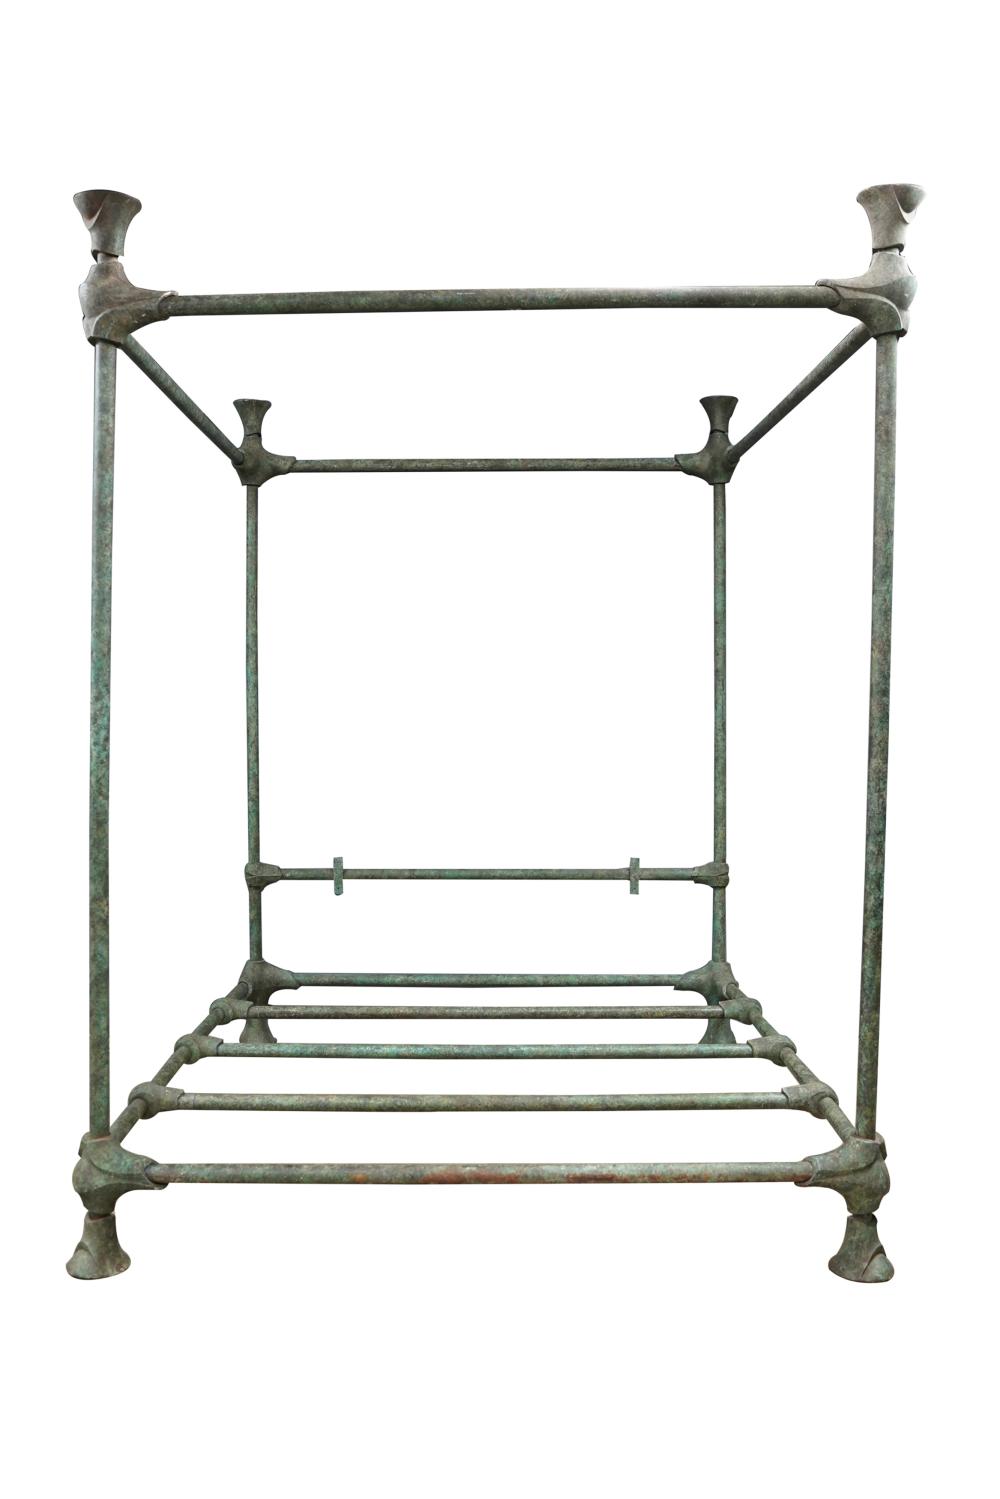 PATINATED IRON FOUR POSTER BEDCondition: